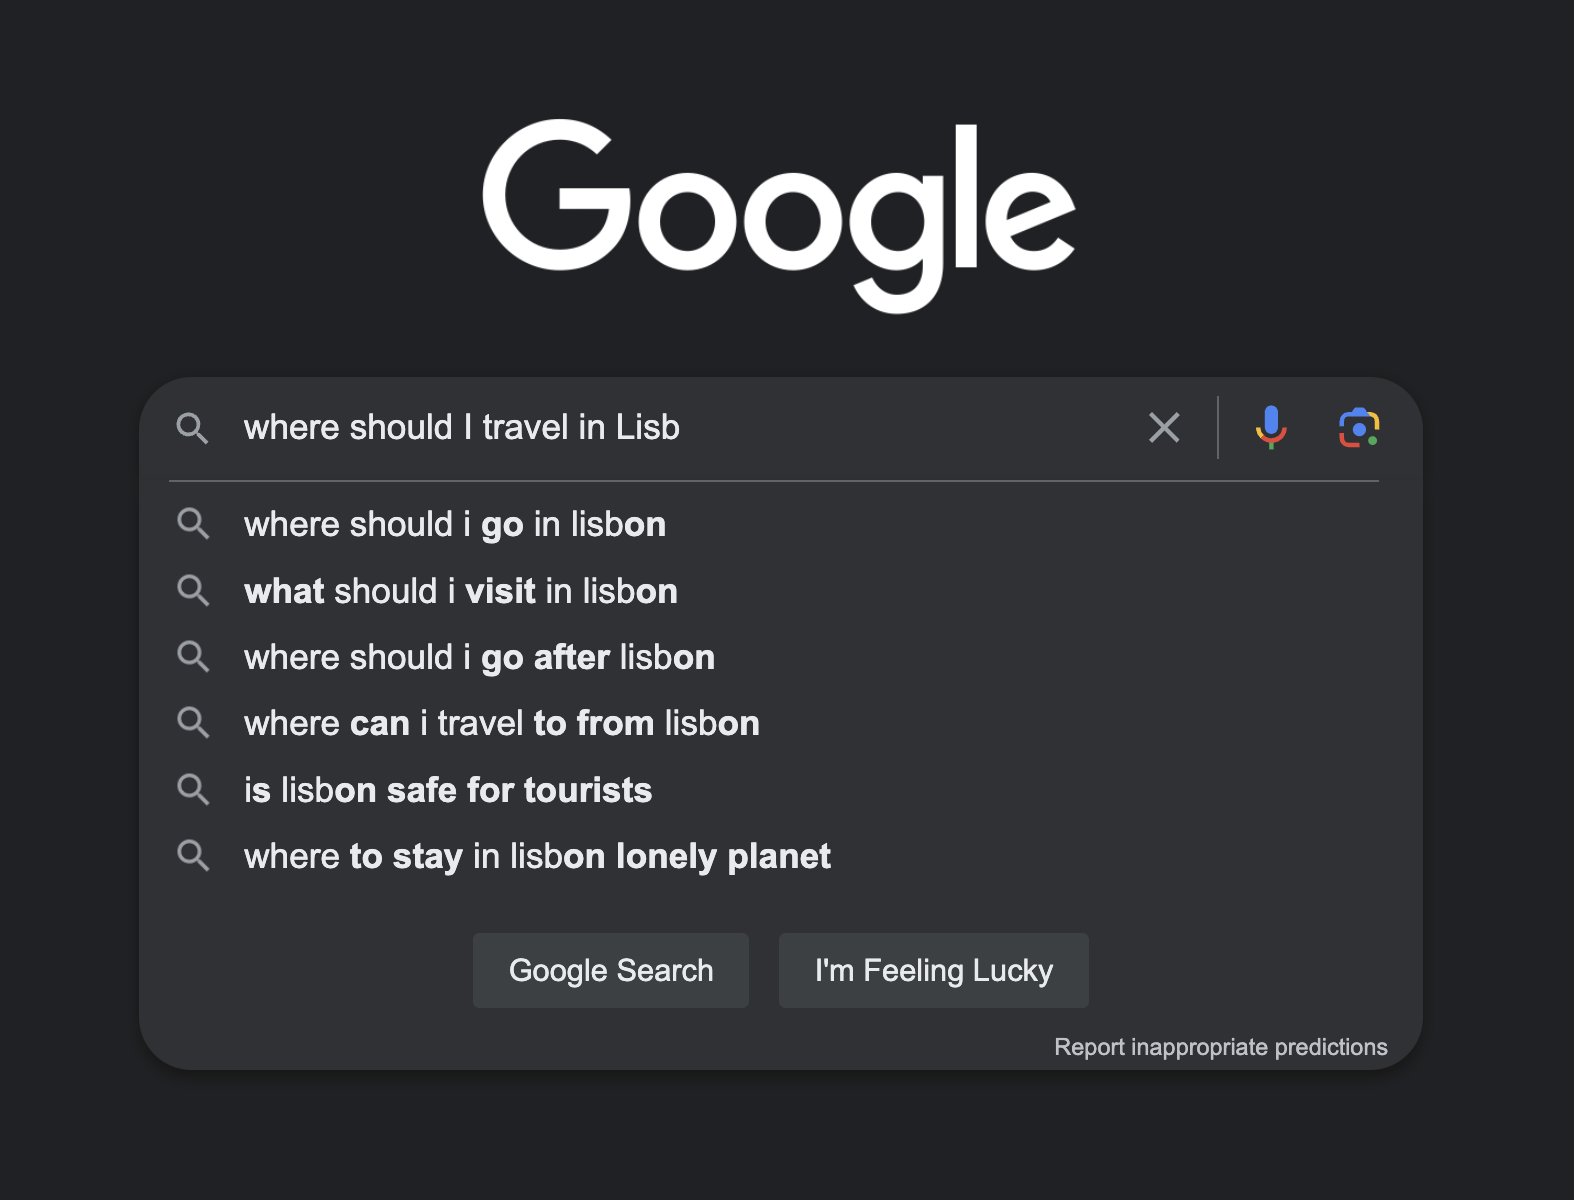 Google autocomplete related to a Lisbon travel query